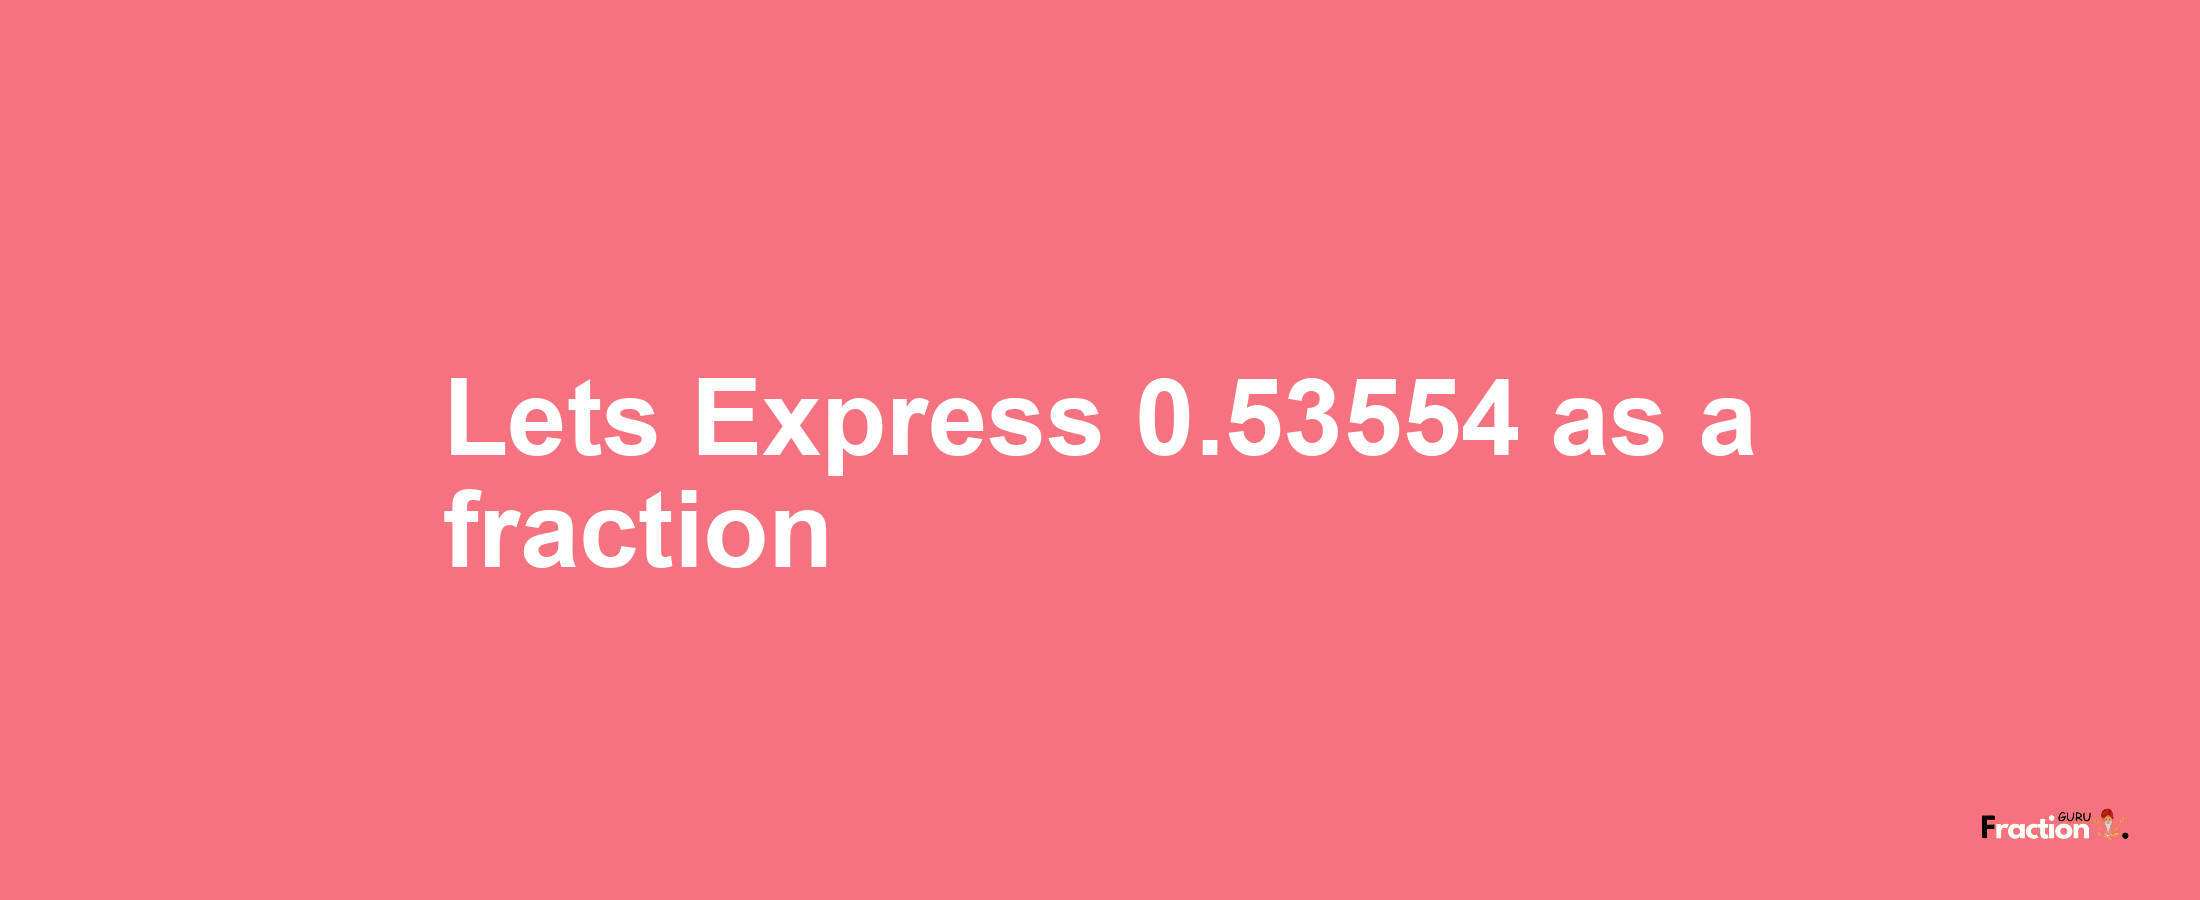 Lets Express 0.53554 as afraction